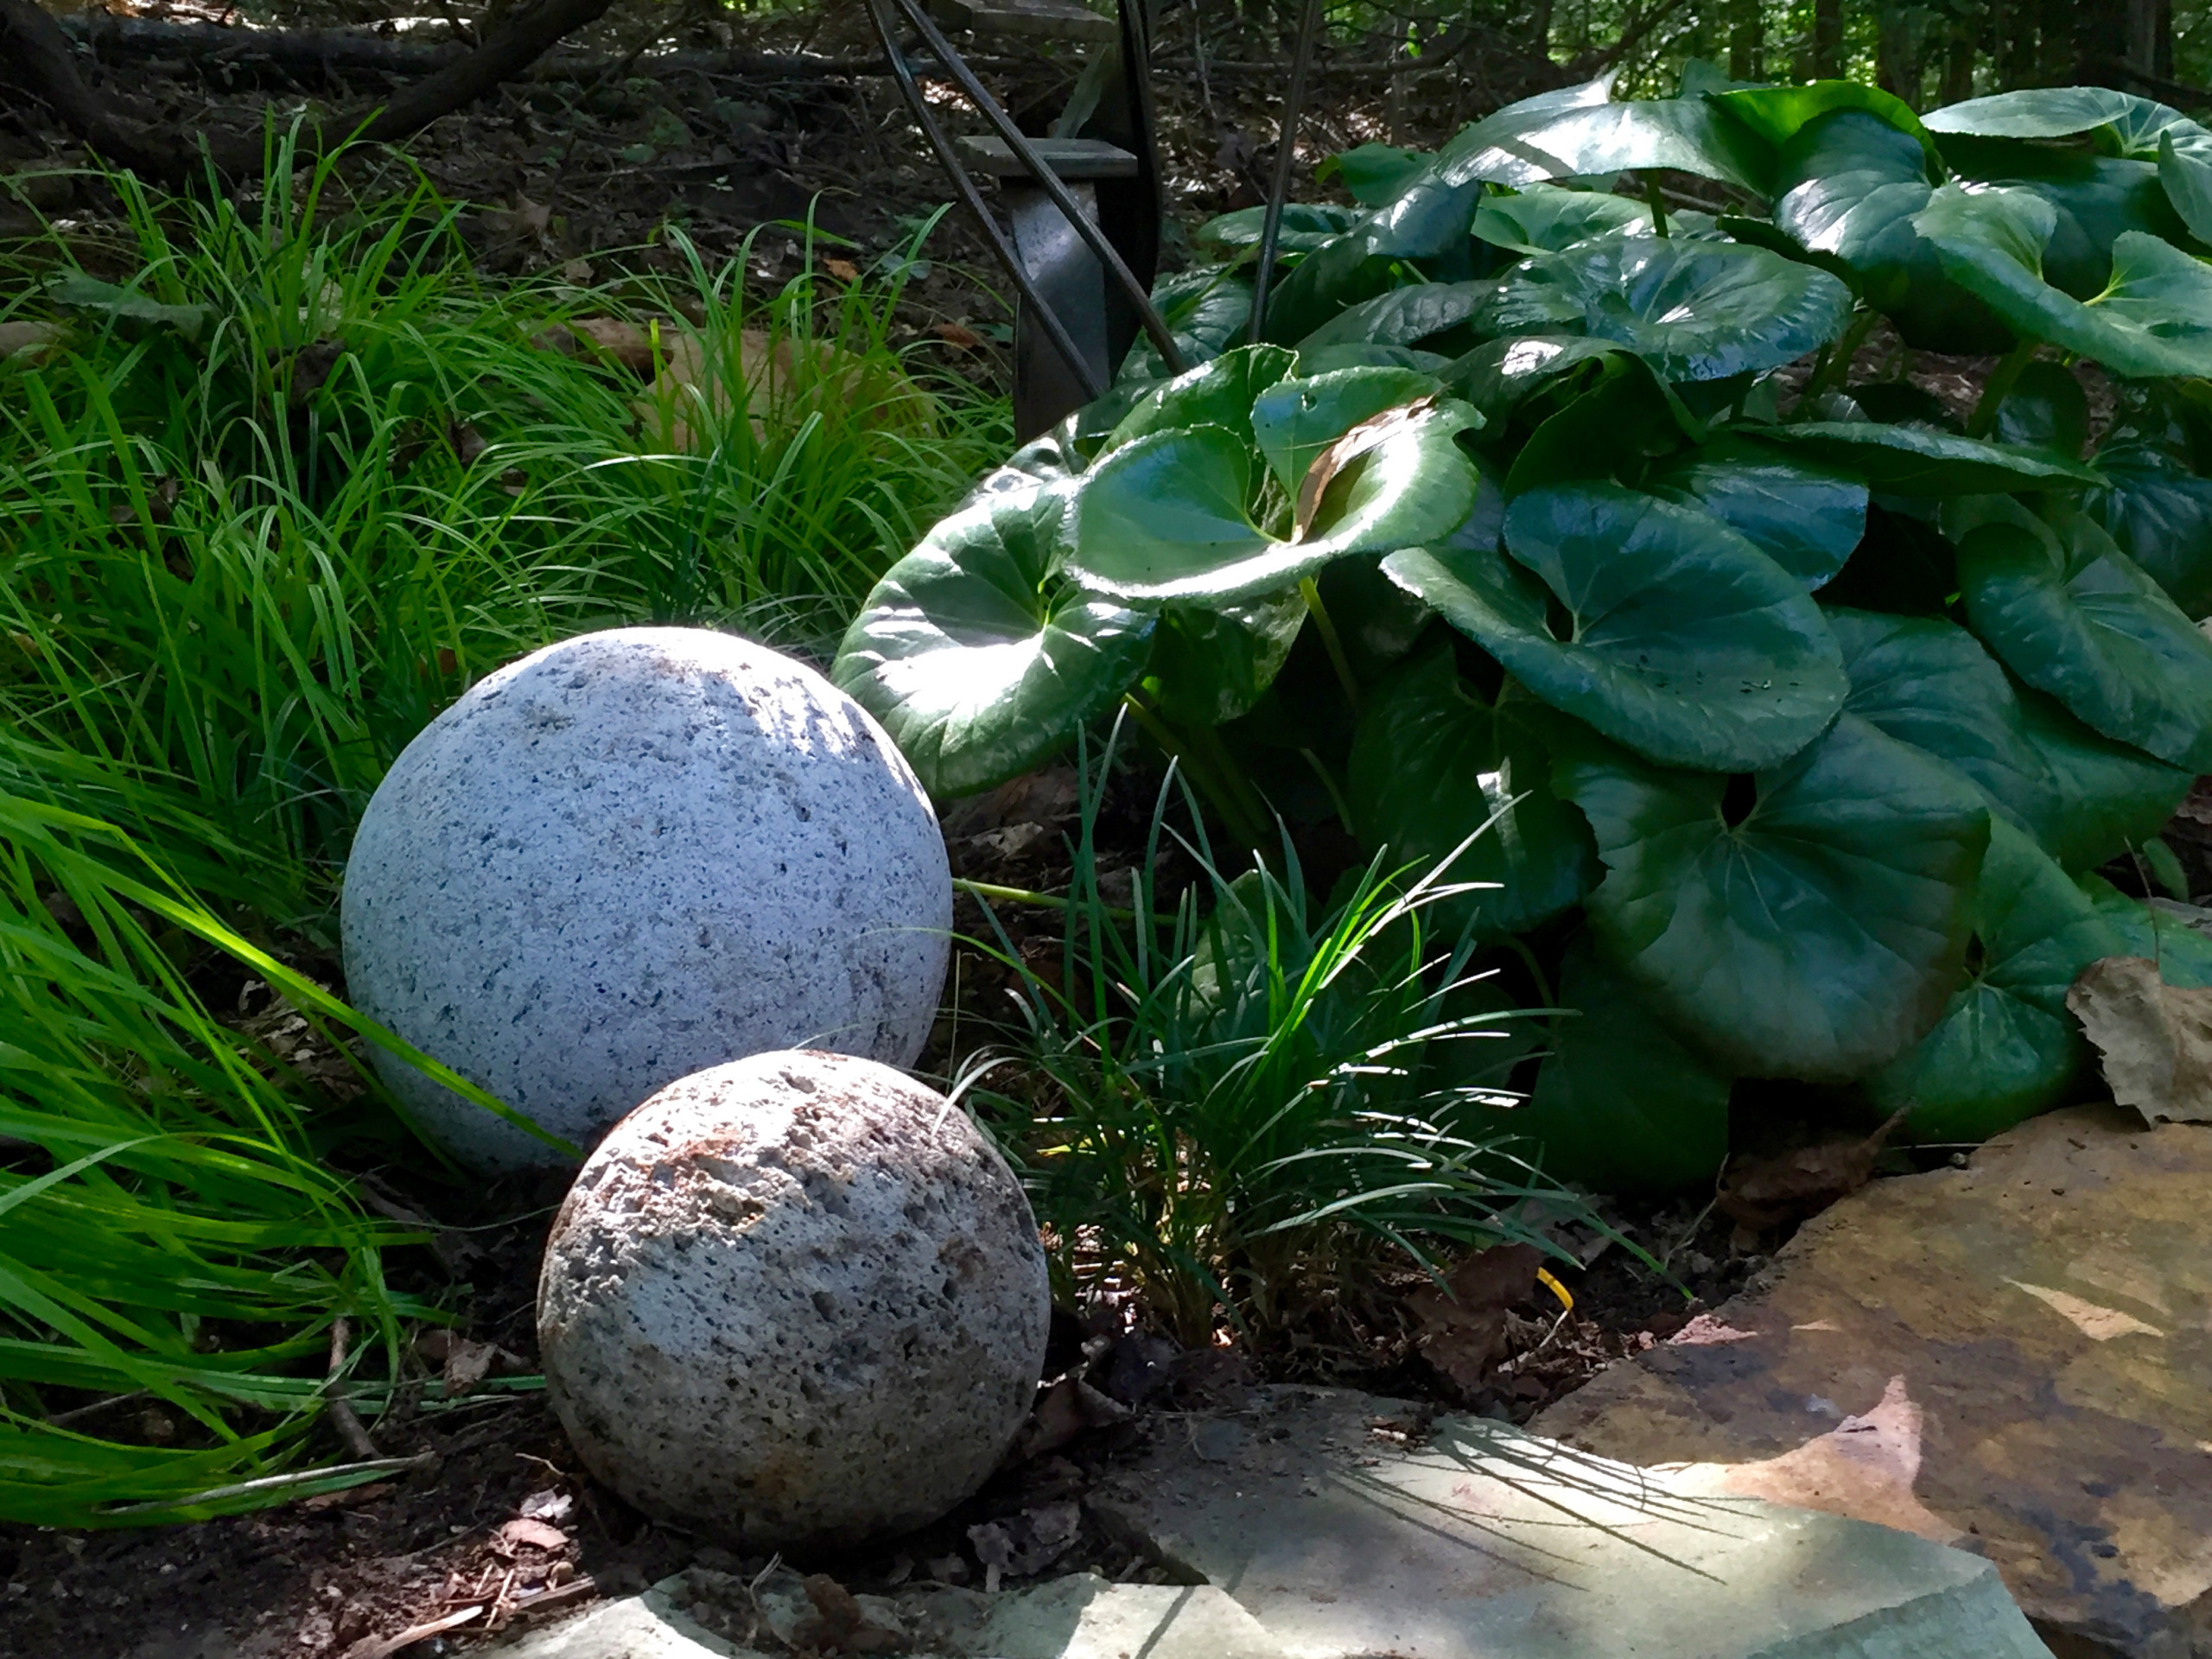 Spheres along a forest path